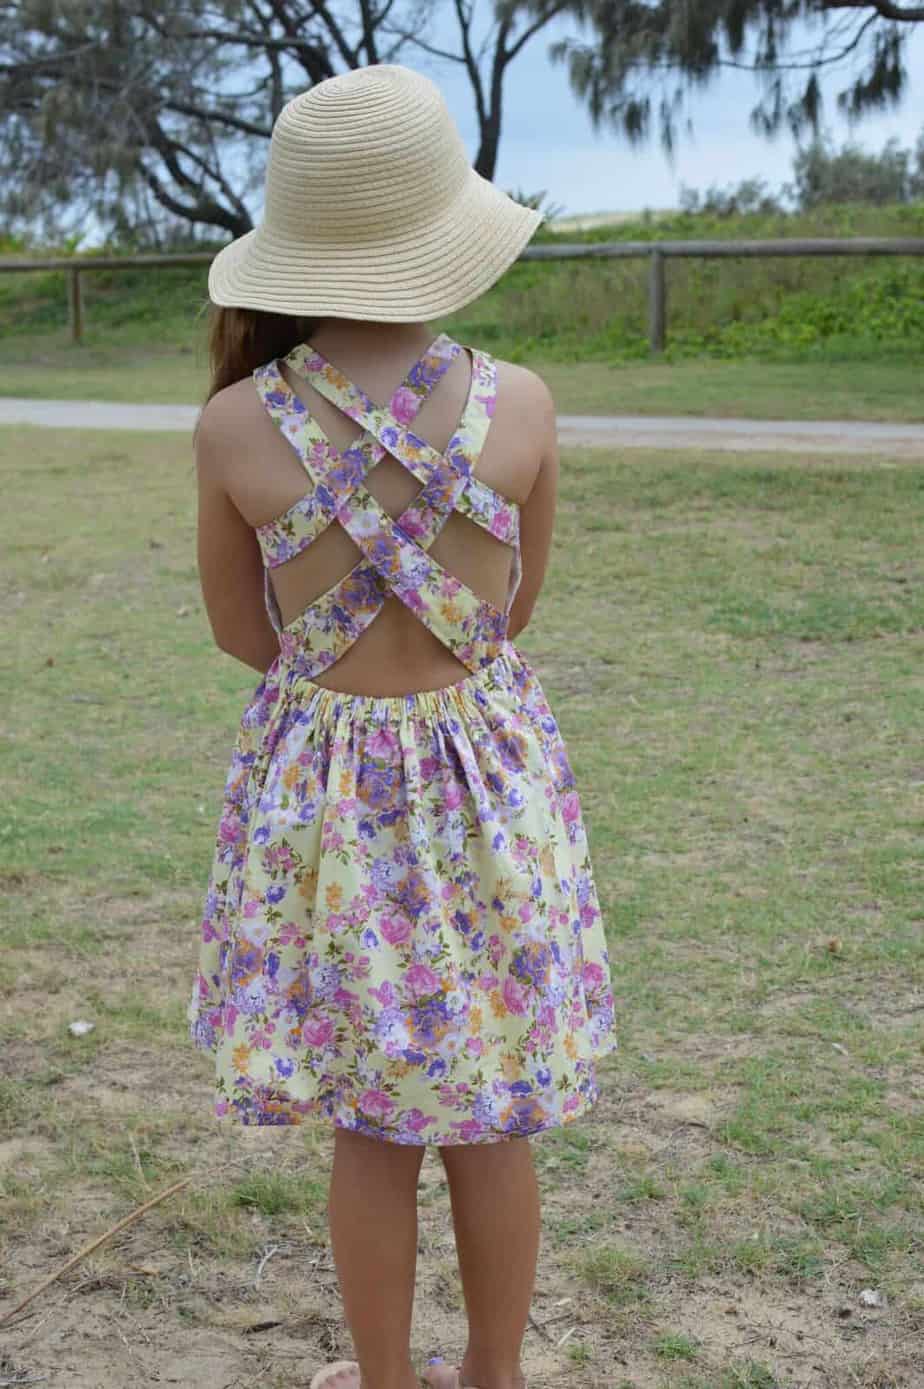 Summer dress sewing pattern for girls with strappy back from Bubby and Me Creations.